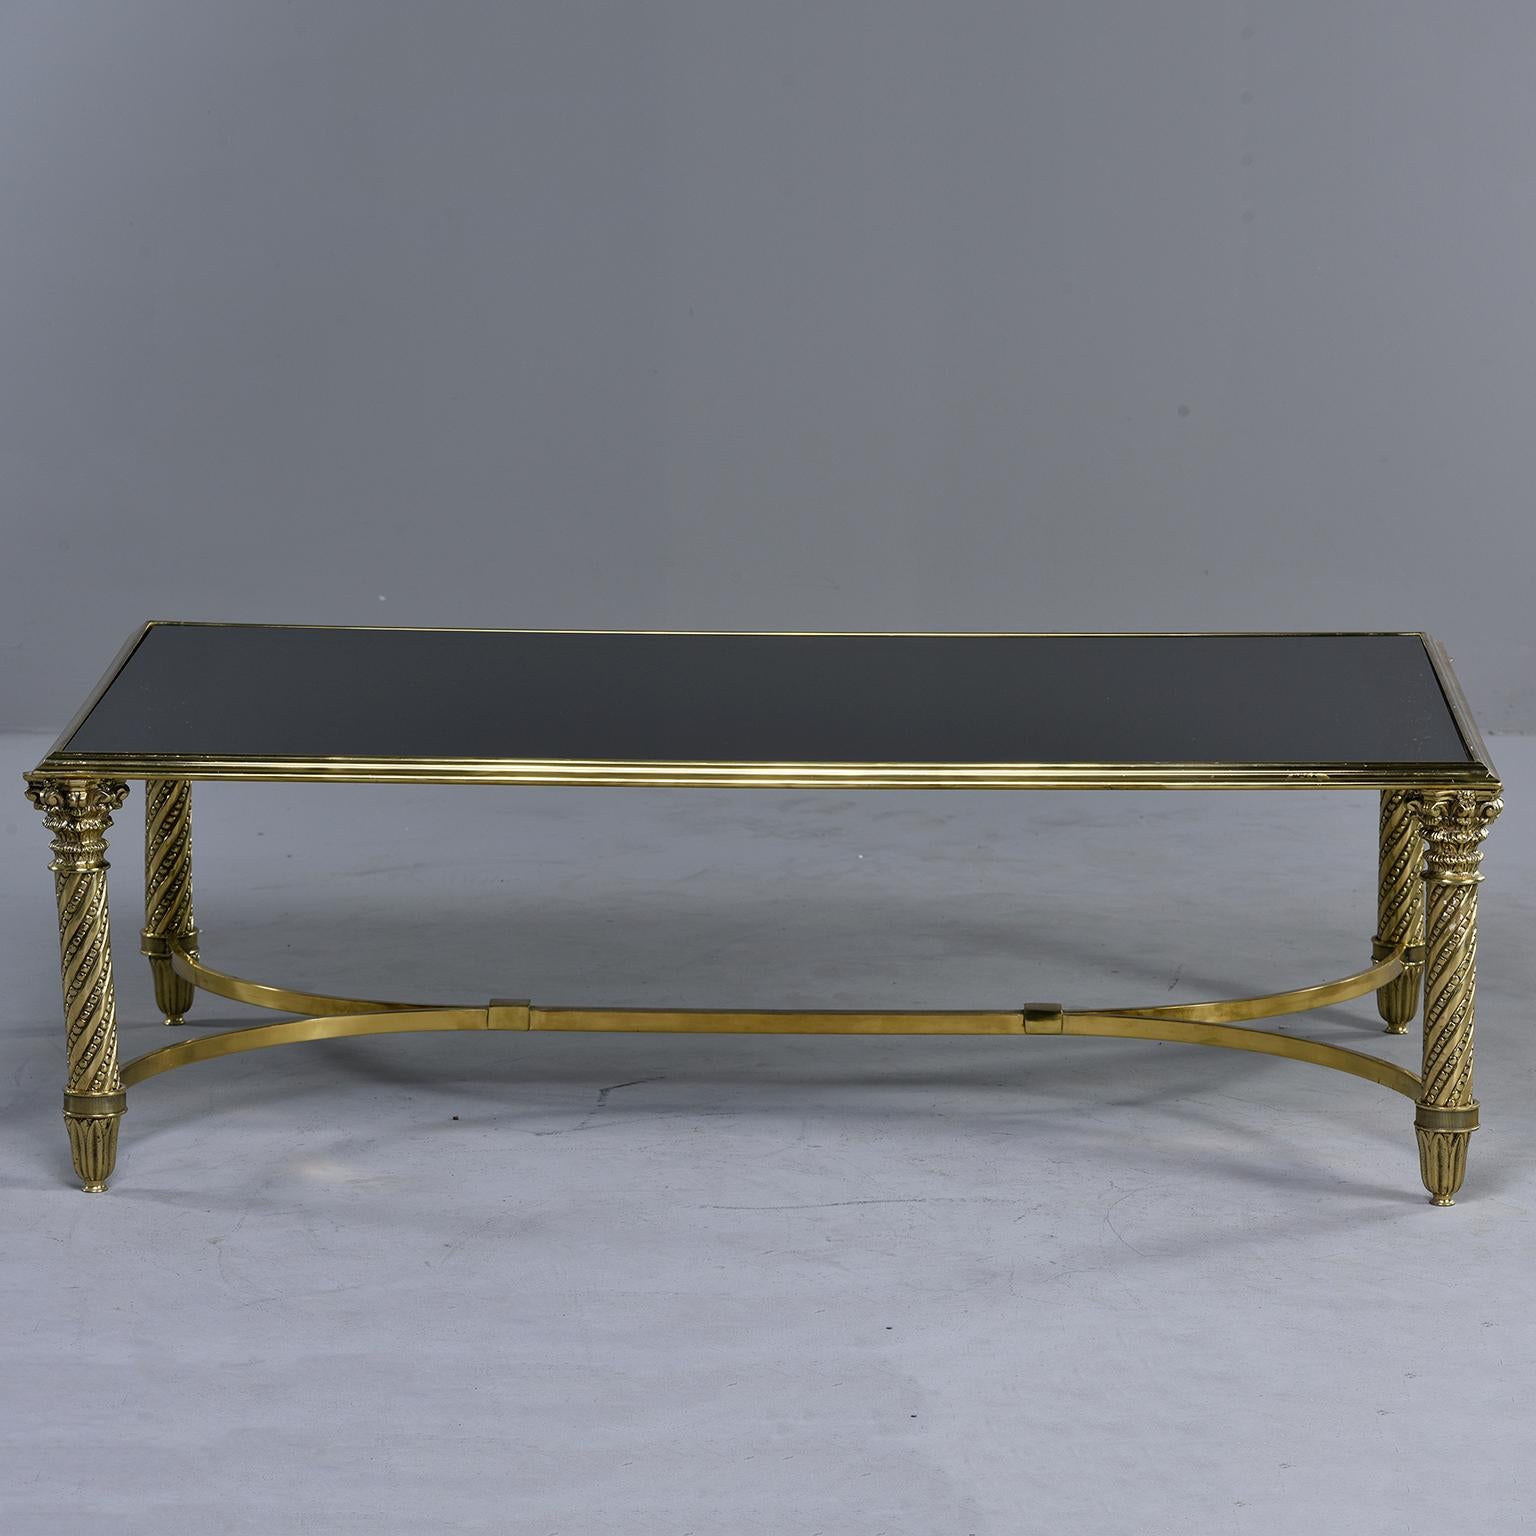 20th Century Large Spanish Neoclassical Style Brass and Glass Coffee Table